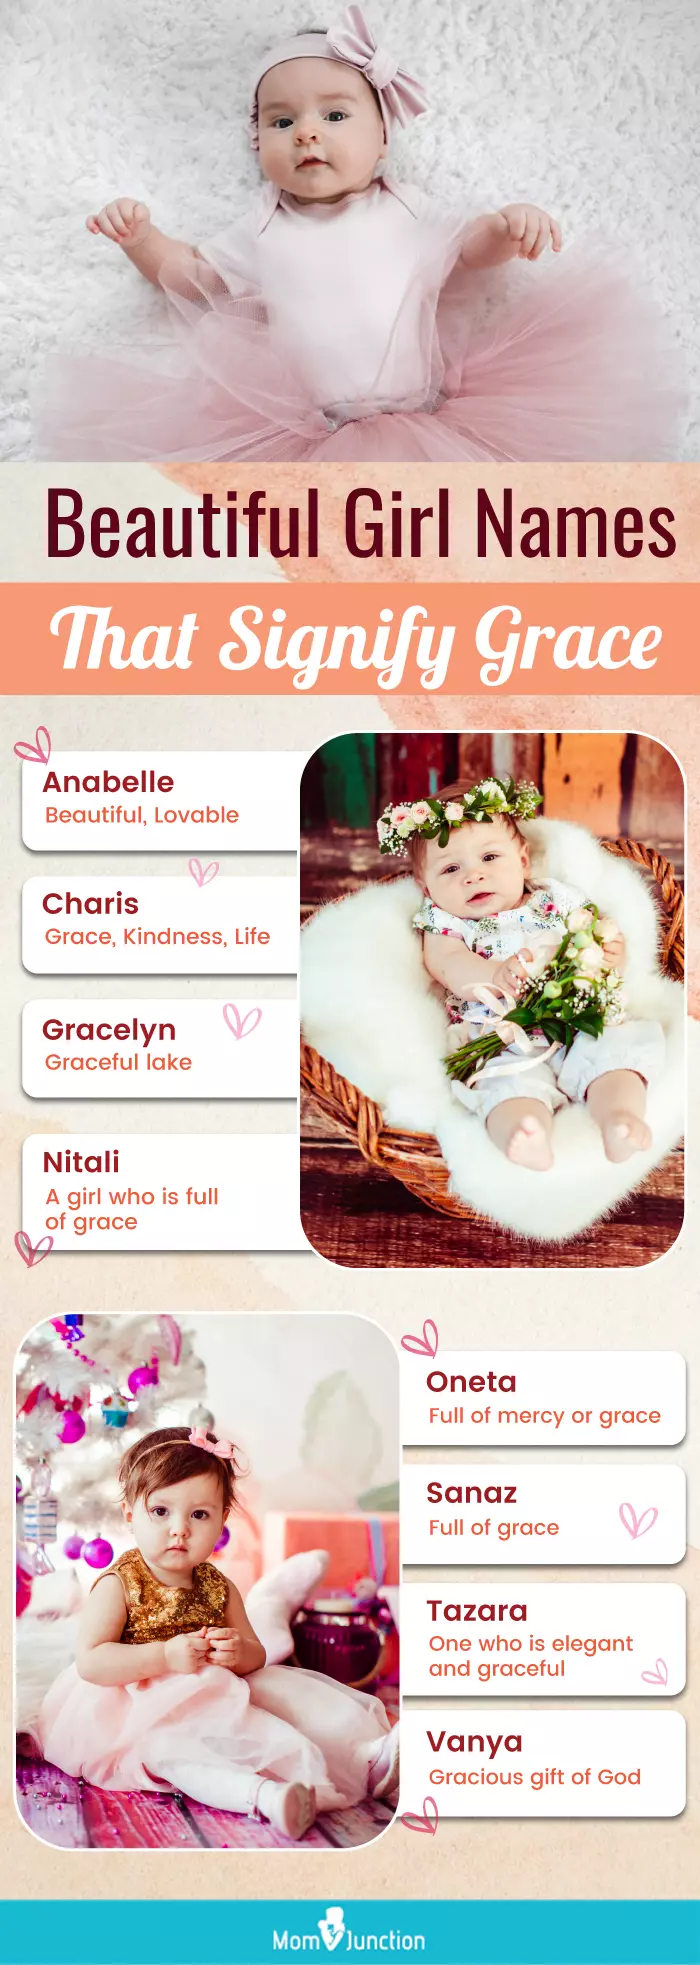 beautiful girl names that signify grace (infographic)